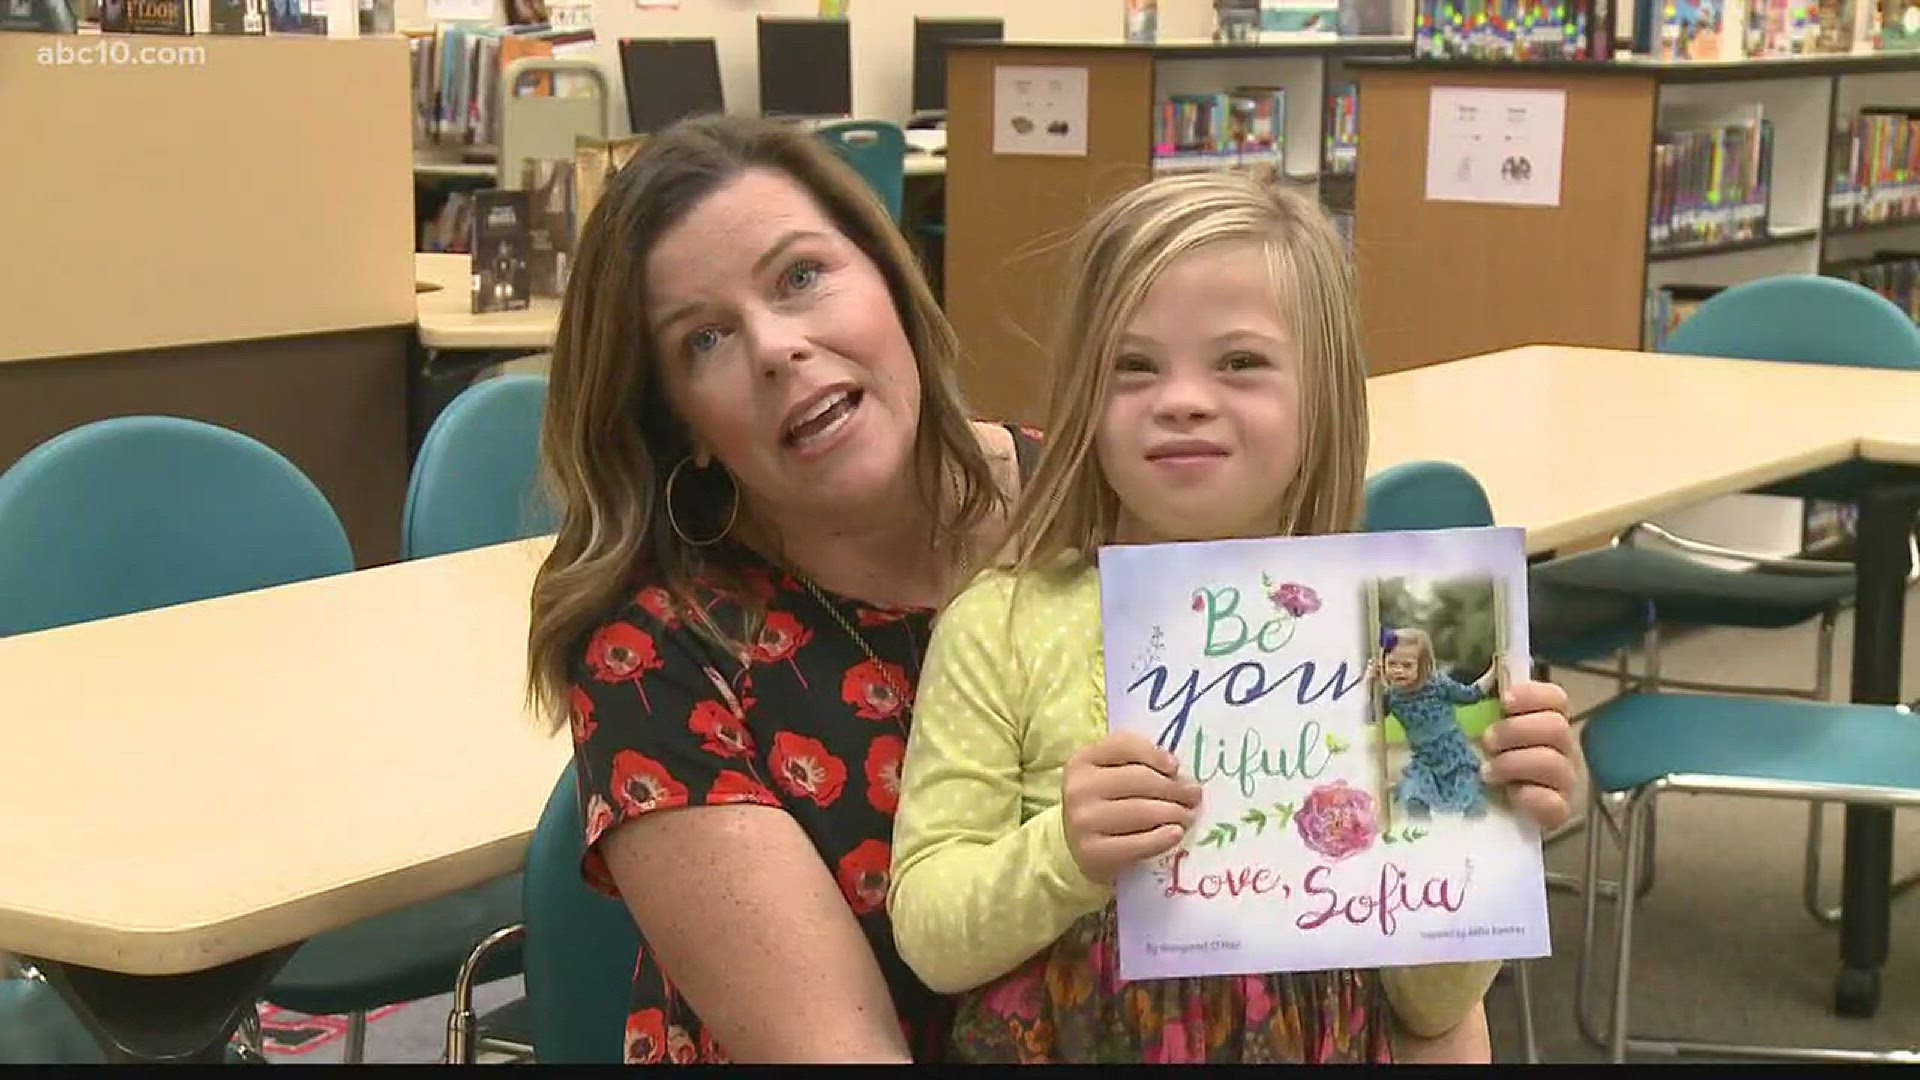 Sofia Sanchez, 8, partnered with Margaret O'Hair an award-winning author and Kindergarten teacher in Roseville to write a book about her trials and triumphs. (Oct. 20, 2017)